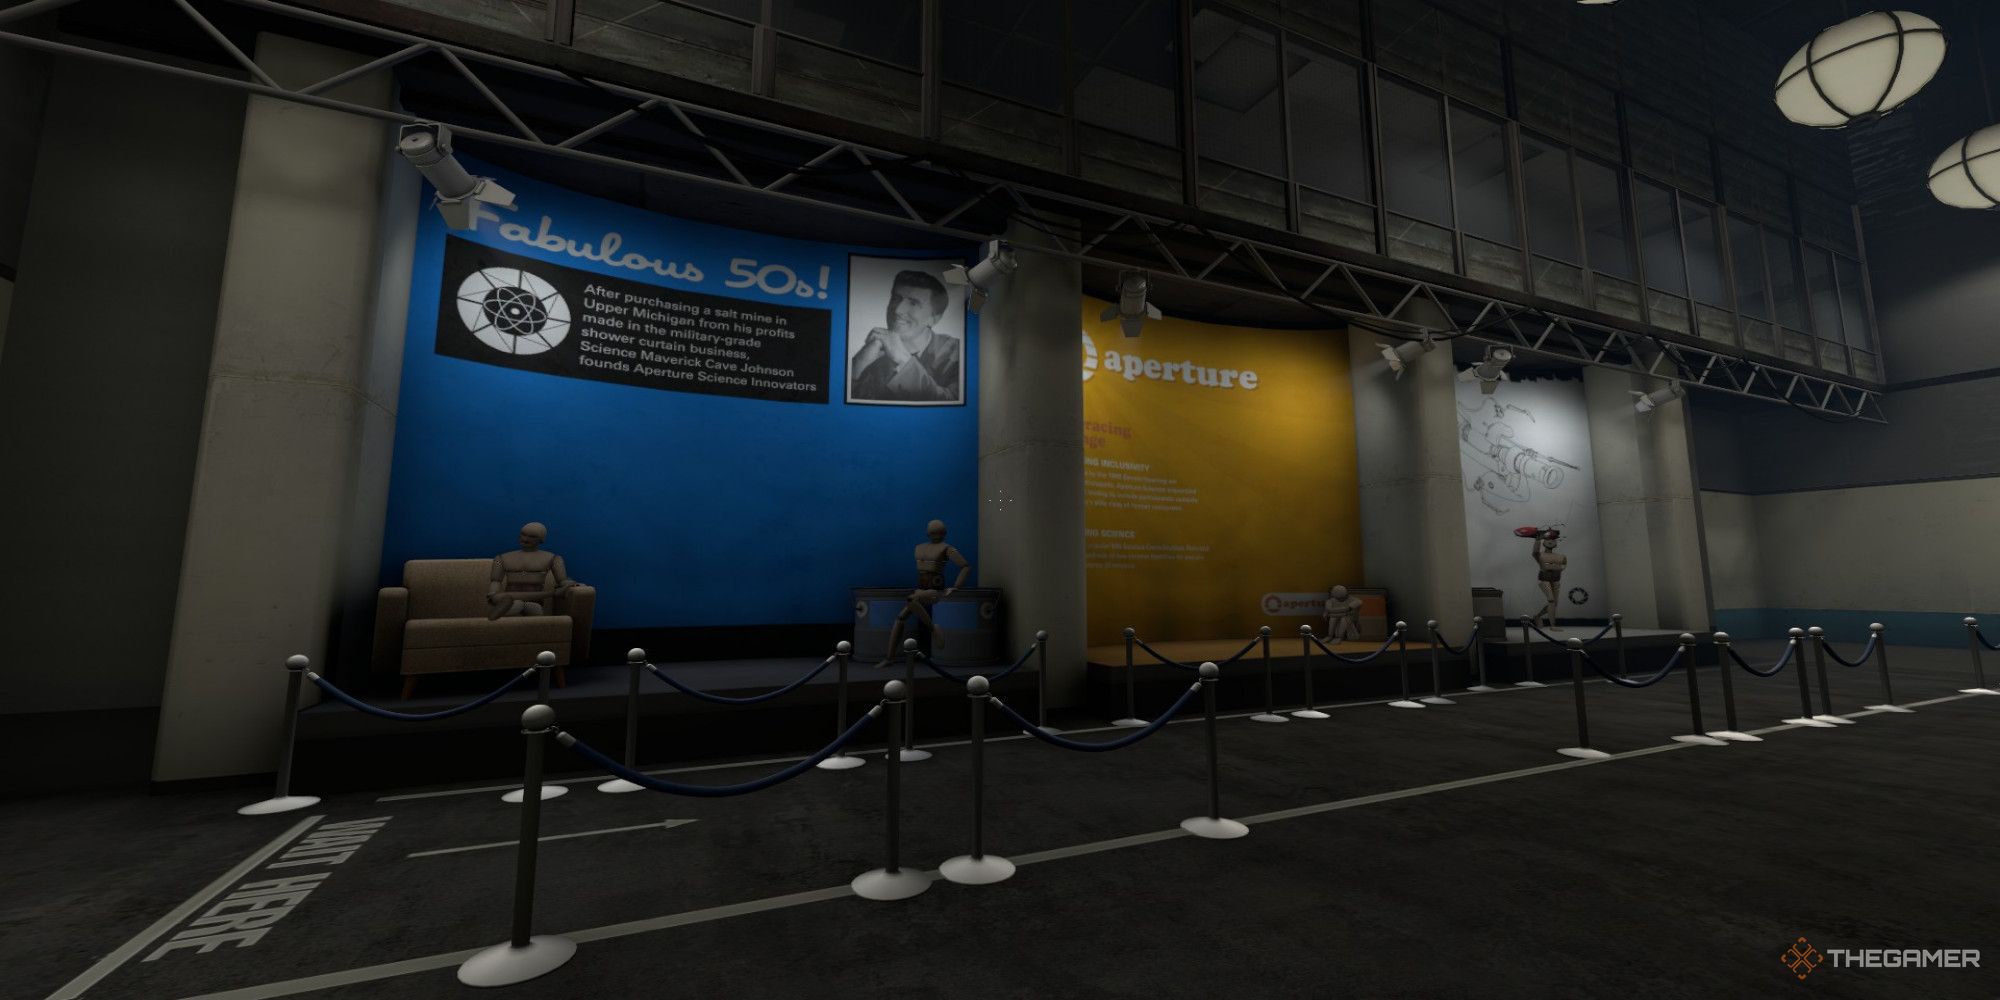 A screenshot from Portal Revolution showing a 1950's display bragging about Aperture's achievements, complete with mannequins and displays showing the progress of the company into Portal Guns.